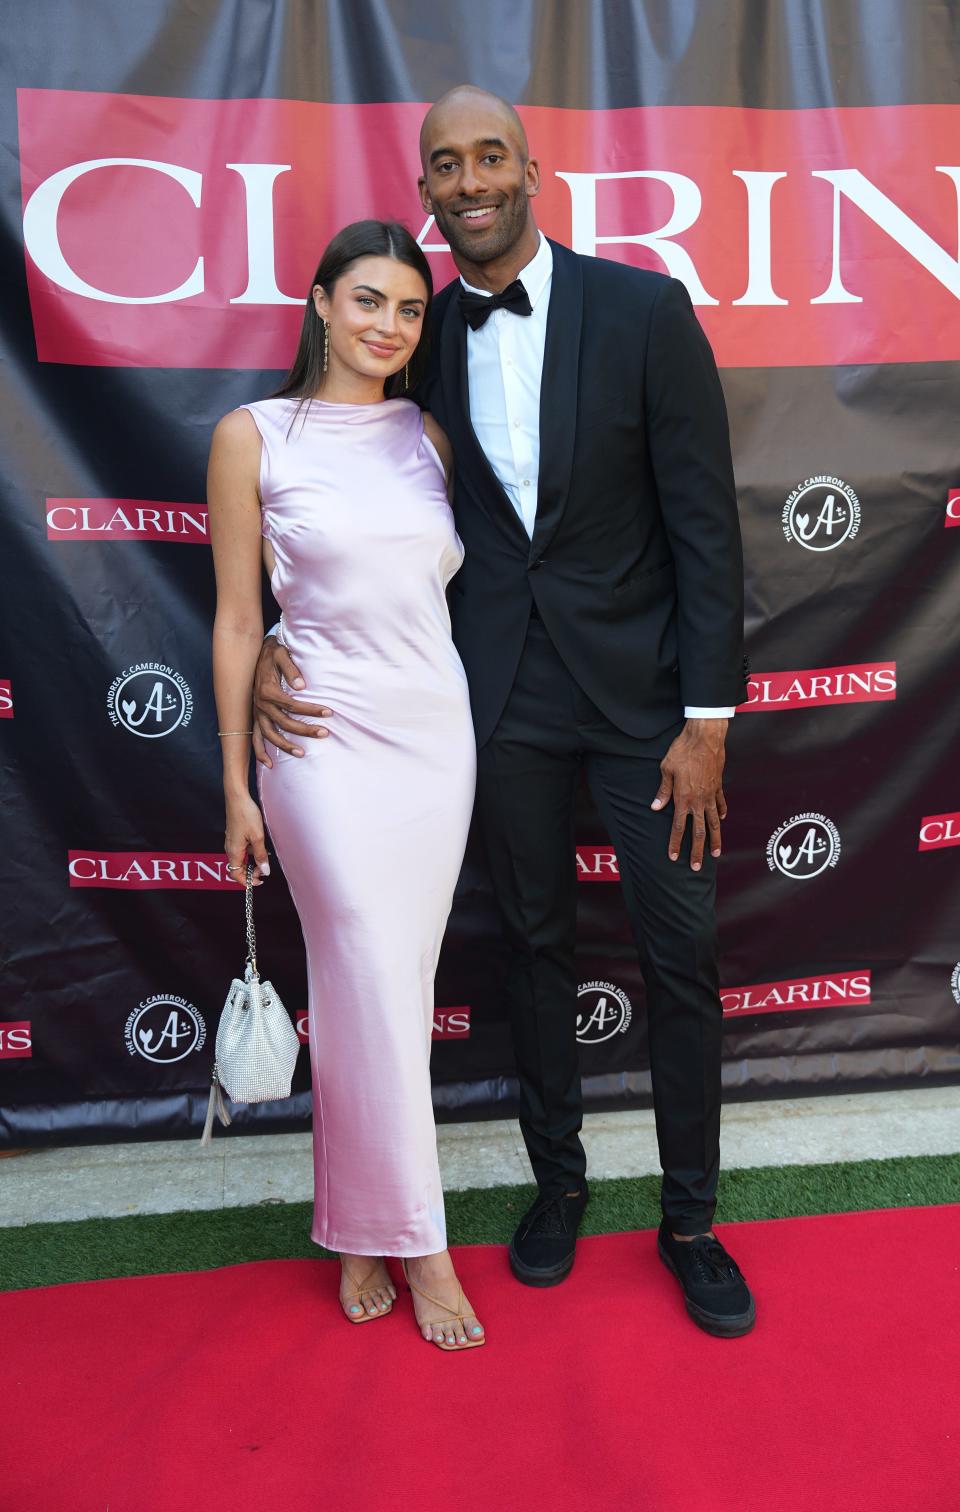 "The Bachelor" alumni Rachel Kirkconnell and Matt James attend the Andrea C. Cameron Foundation’s inaugural Gala at the Pelican Club on Thursday, September 22, 2022 in Jupiter.